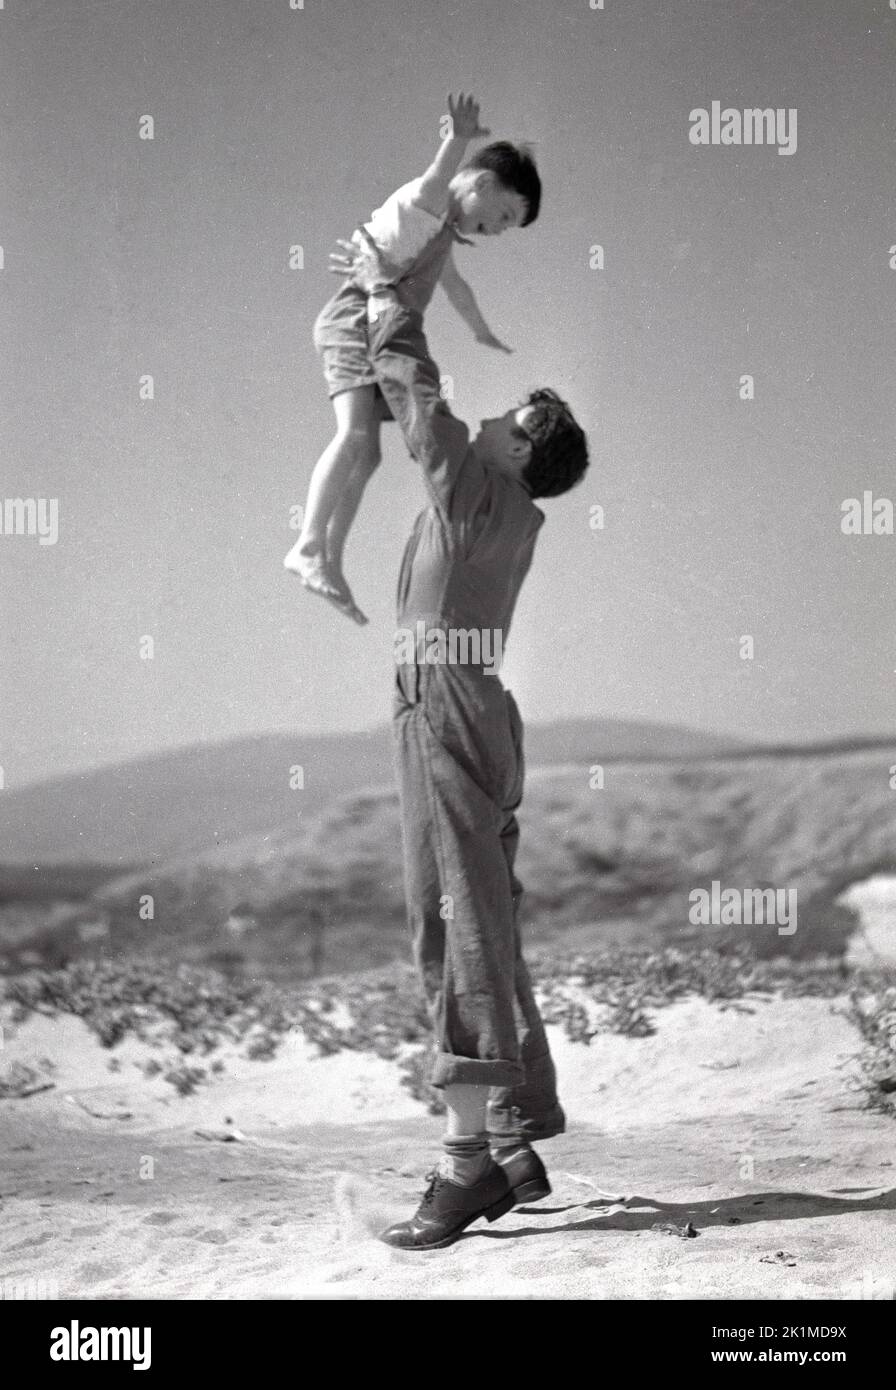 1930s, historical, man in overalls, car mechanic, holding up his young son on sandy ground, Utah, USA. Stock Photo